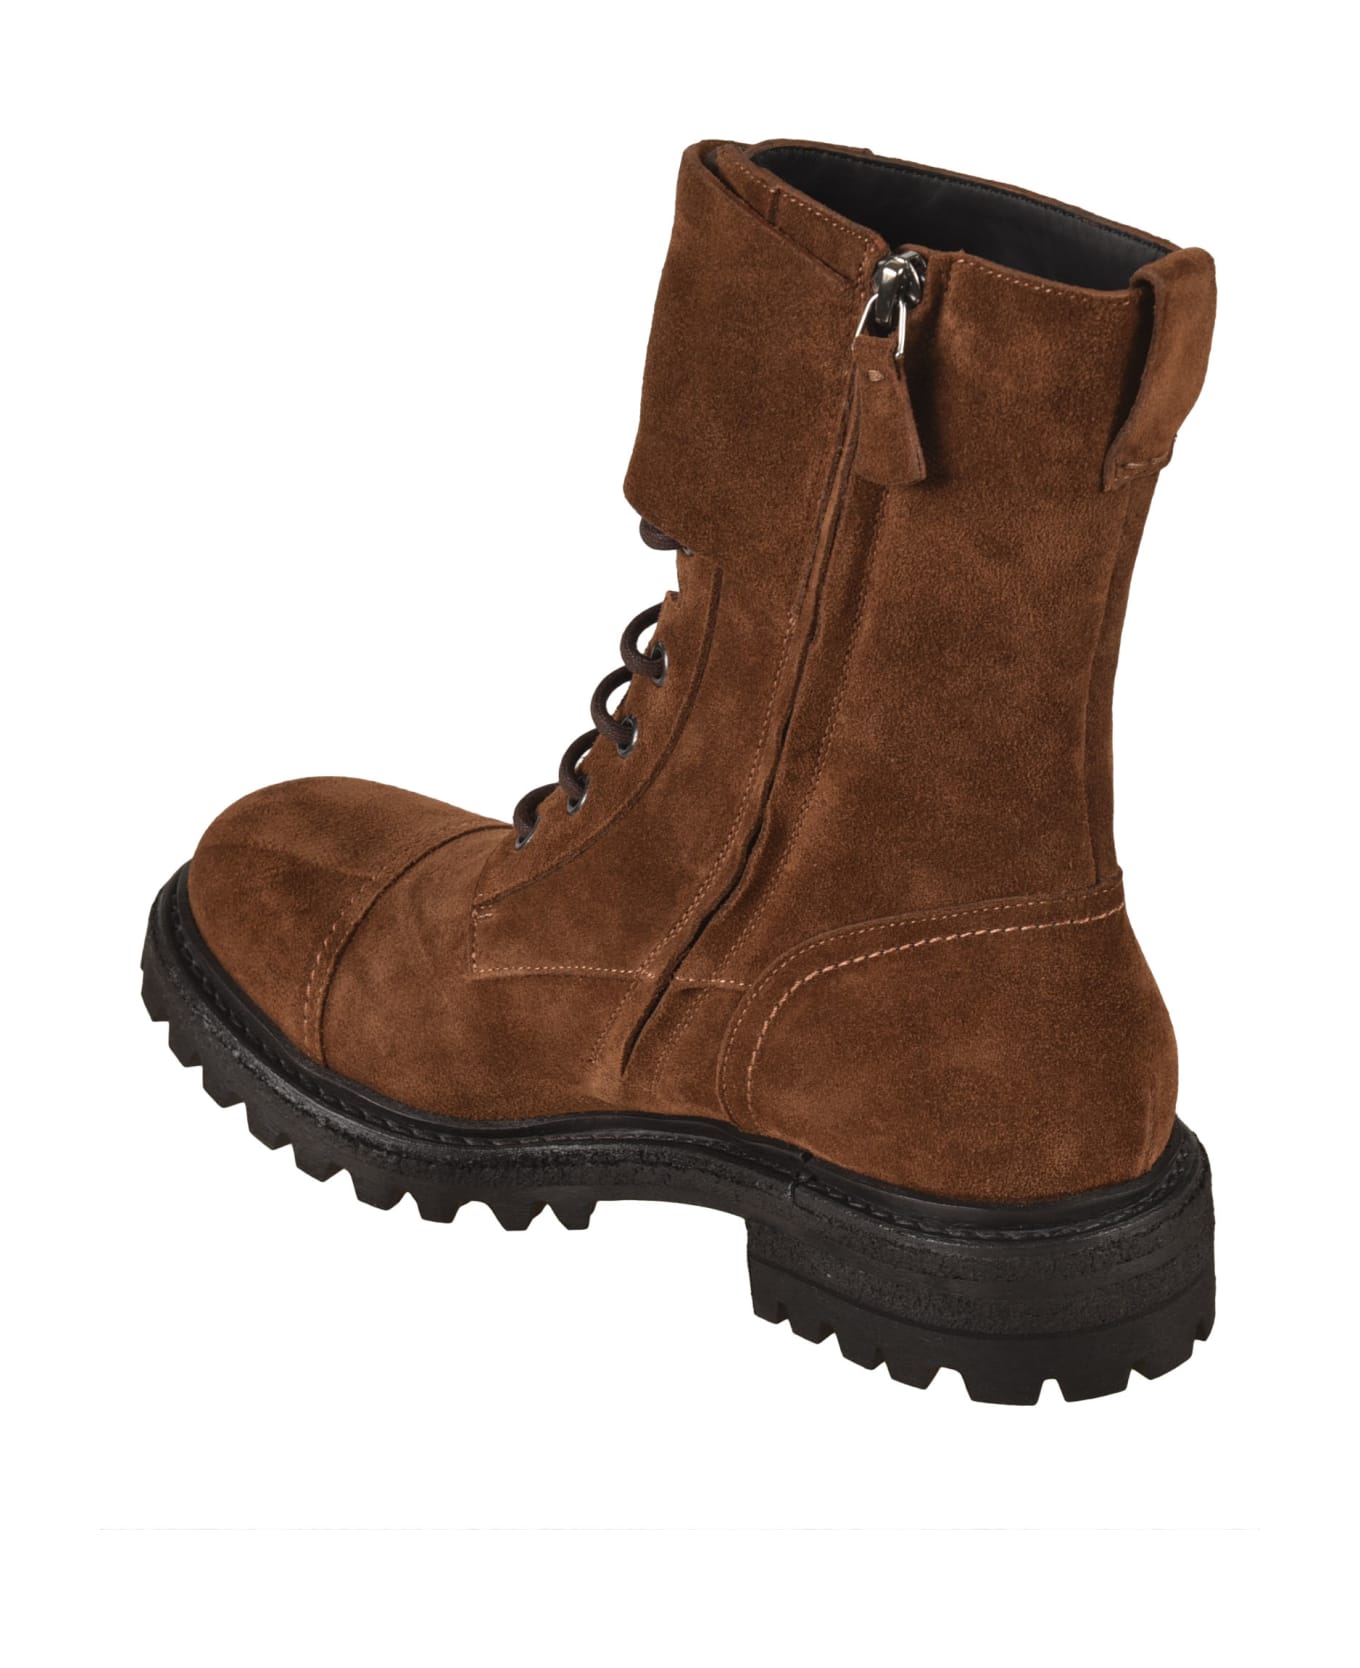 Del Carlo Take Kaleido Lace-up Boots - Brown